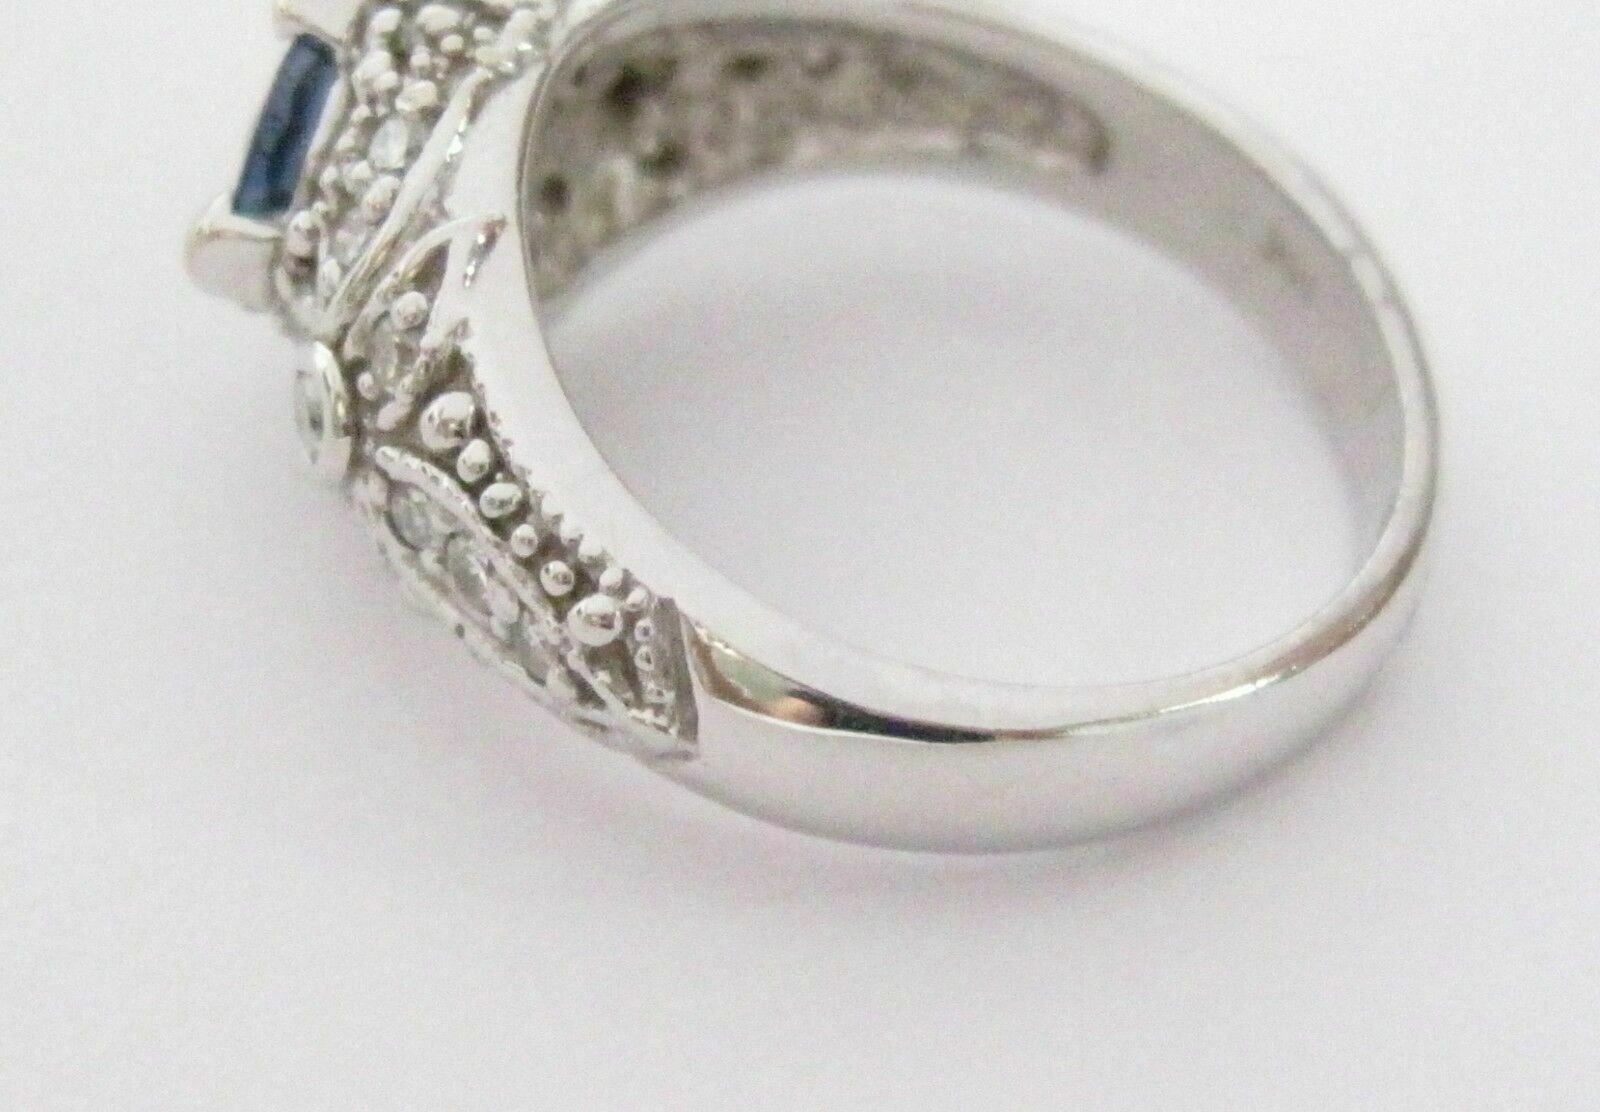 1.74 TCW Antique Style Natural Blue Sapphire & Diamond Cocktail Ring Size 6.5